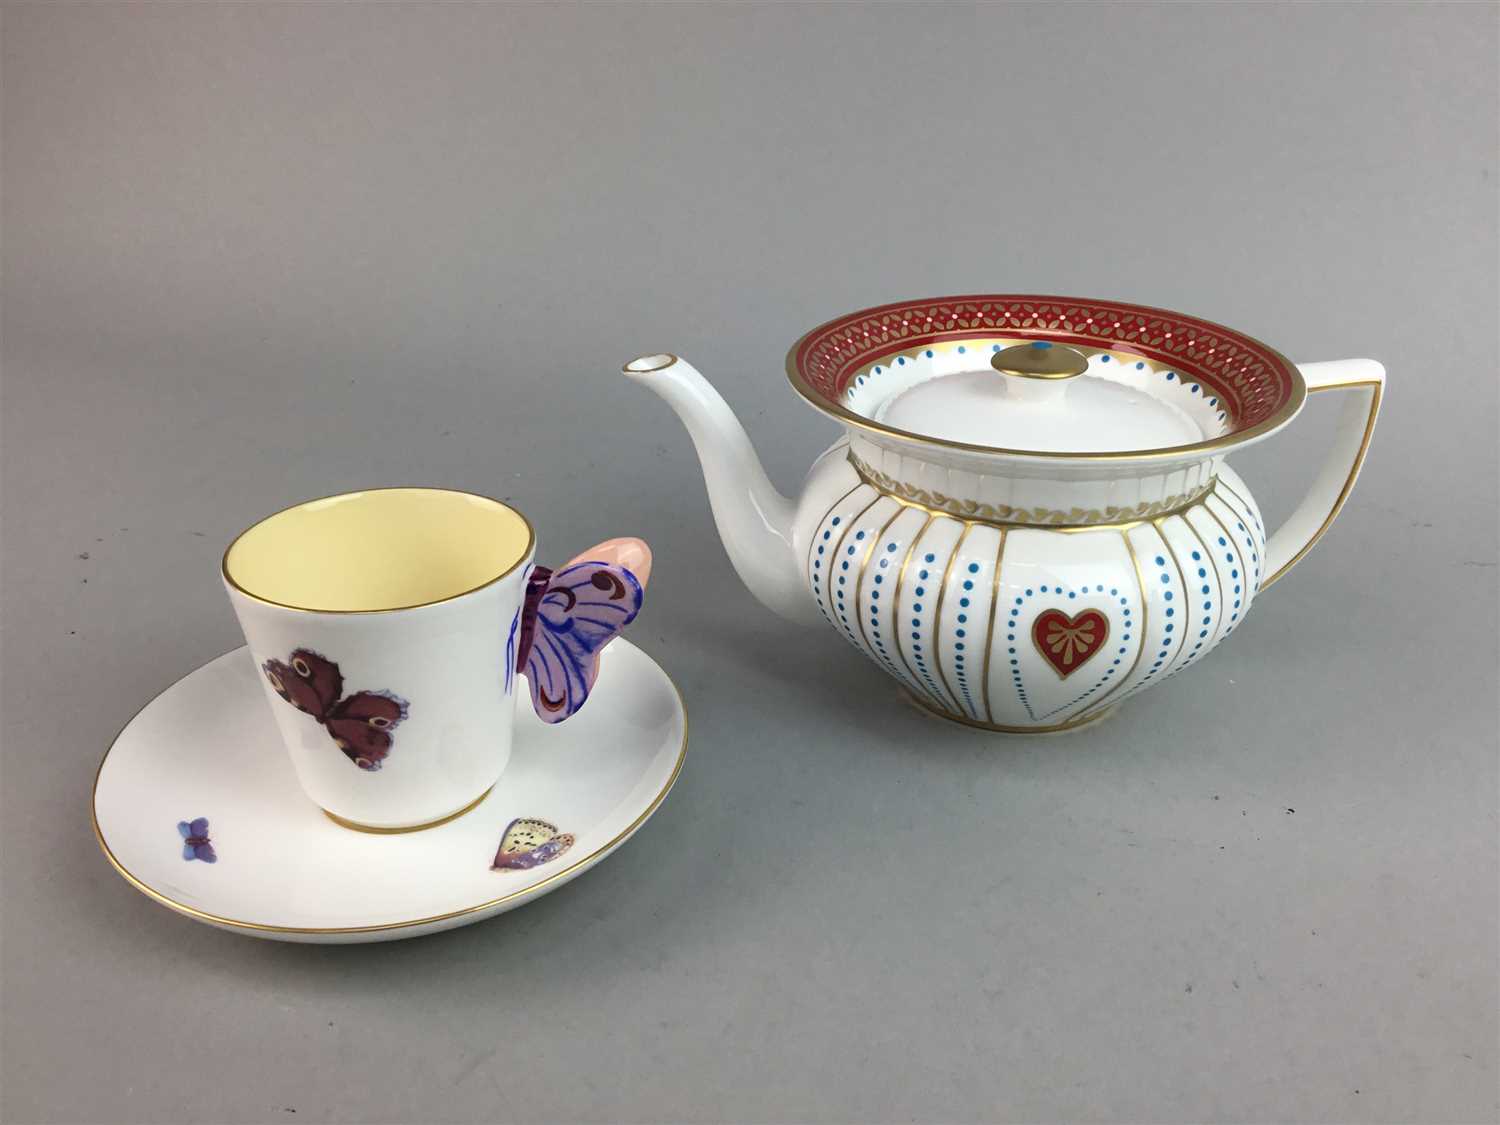 Lot 240 - A WEDGWOOD 'QUEEN OF HEARTS' TEA POT AND OTHER TEA WARE